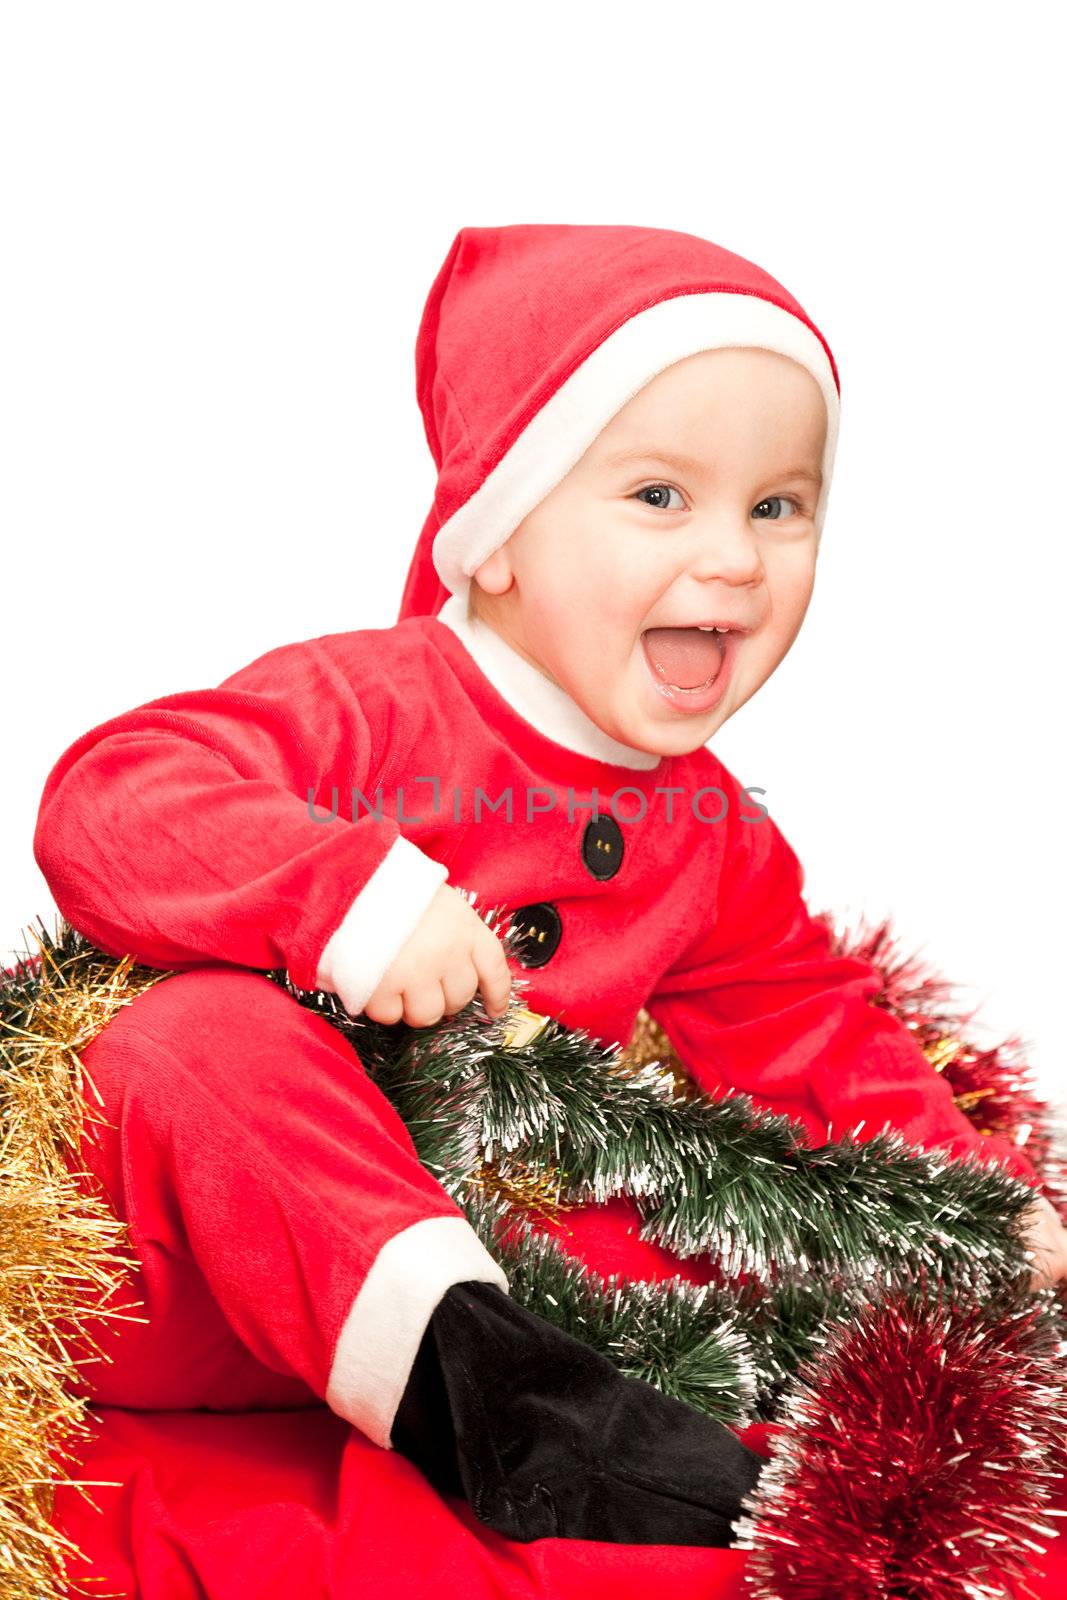 Little baby girl wearing Santa Claus costume on white background